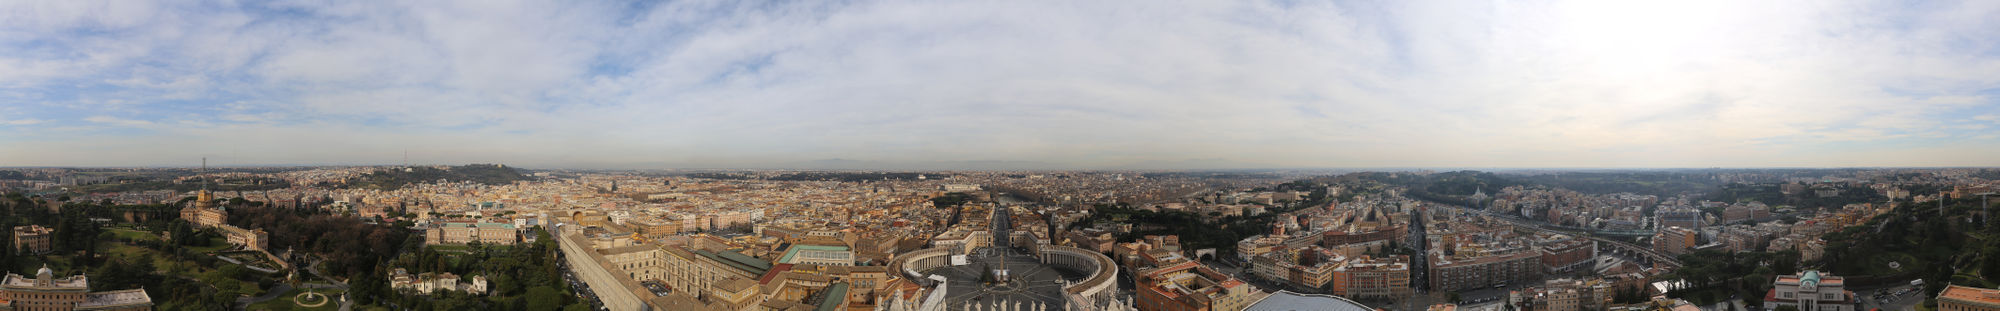 Panorama view from the dome of the St. Peter's Basilica.jpg